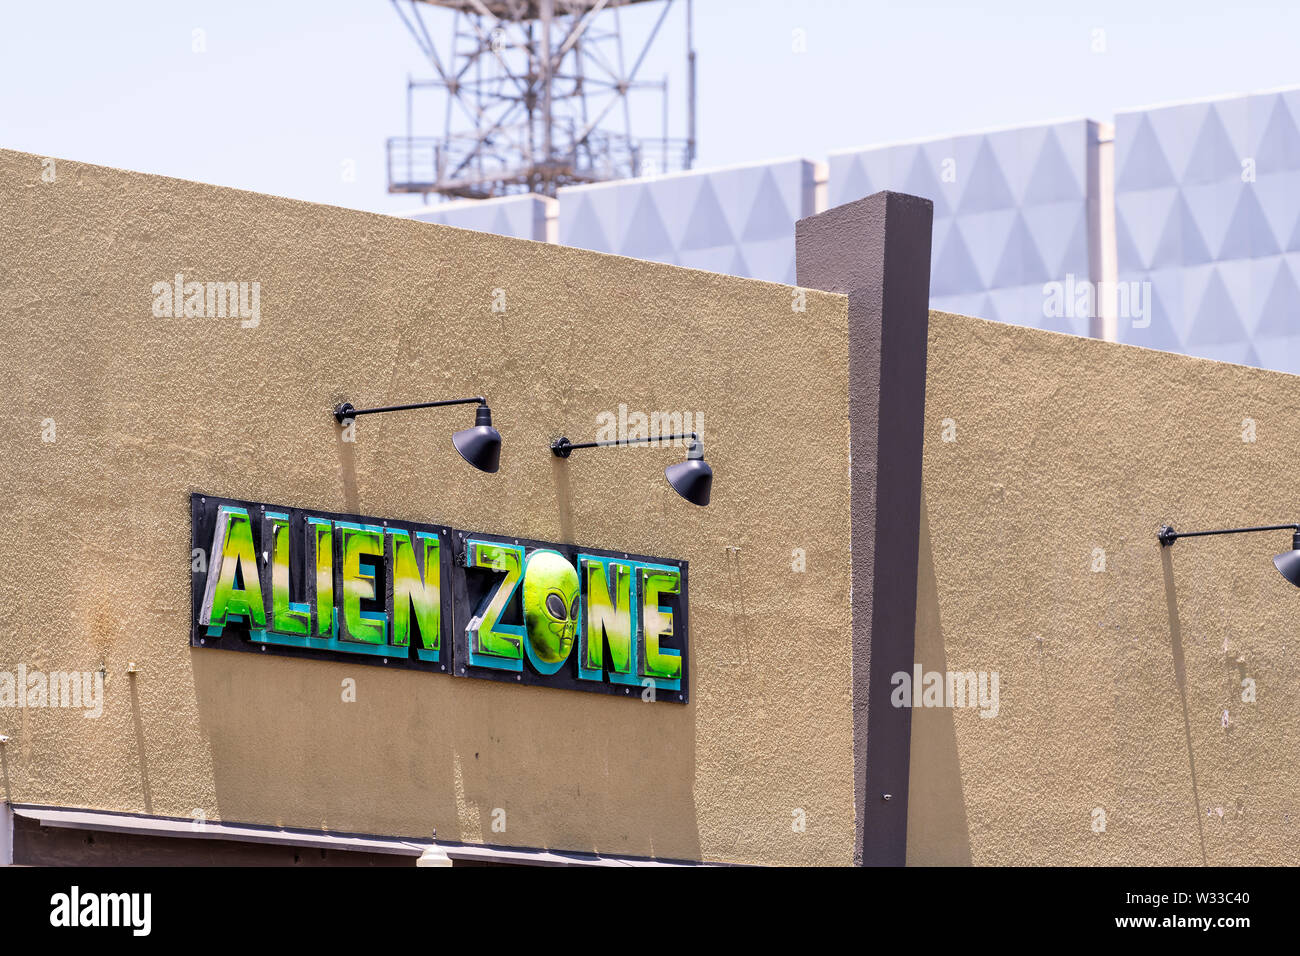 Roswell, USA - June 8, 2019: Main street in New Mexico town city alien sightings and store shop sign for alien zone Stock Photo